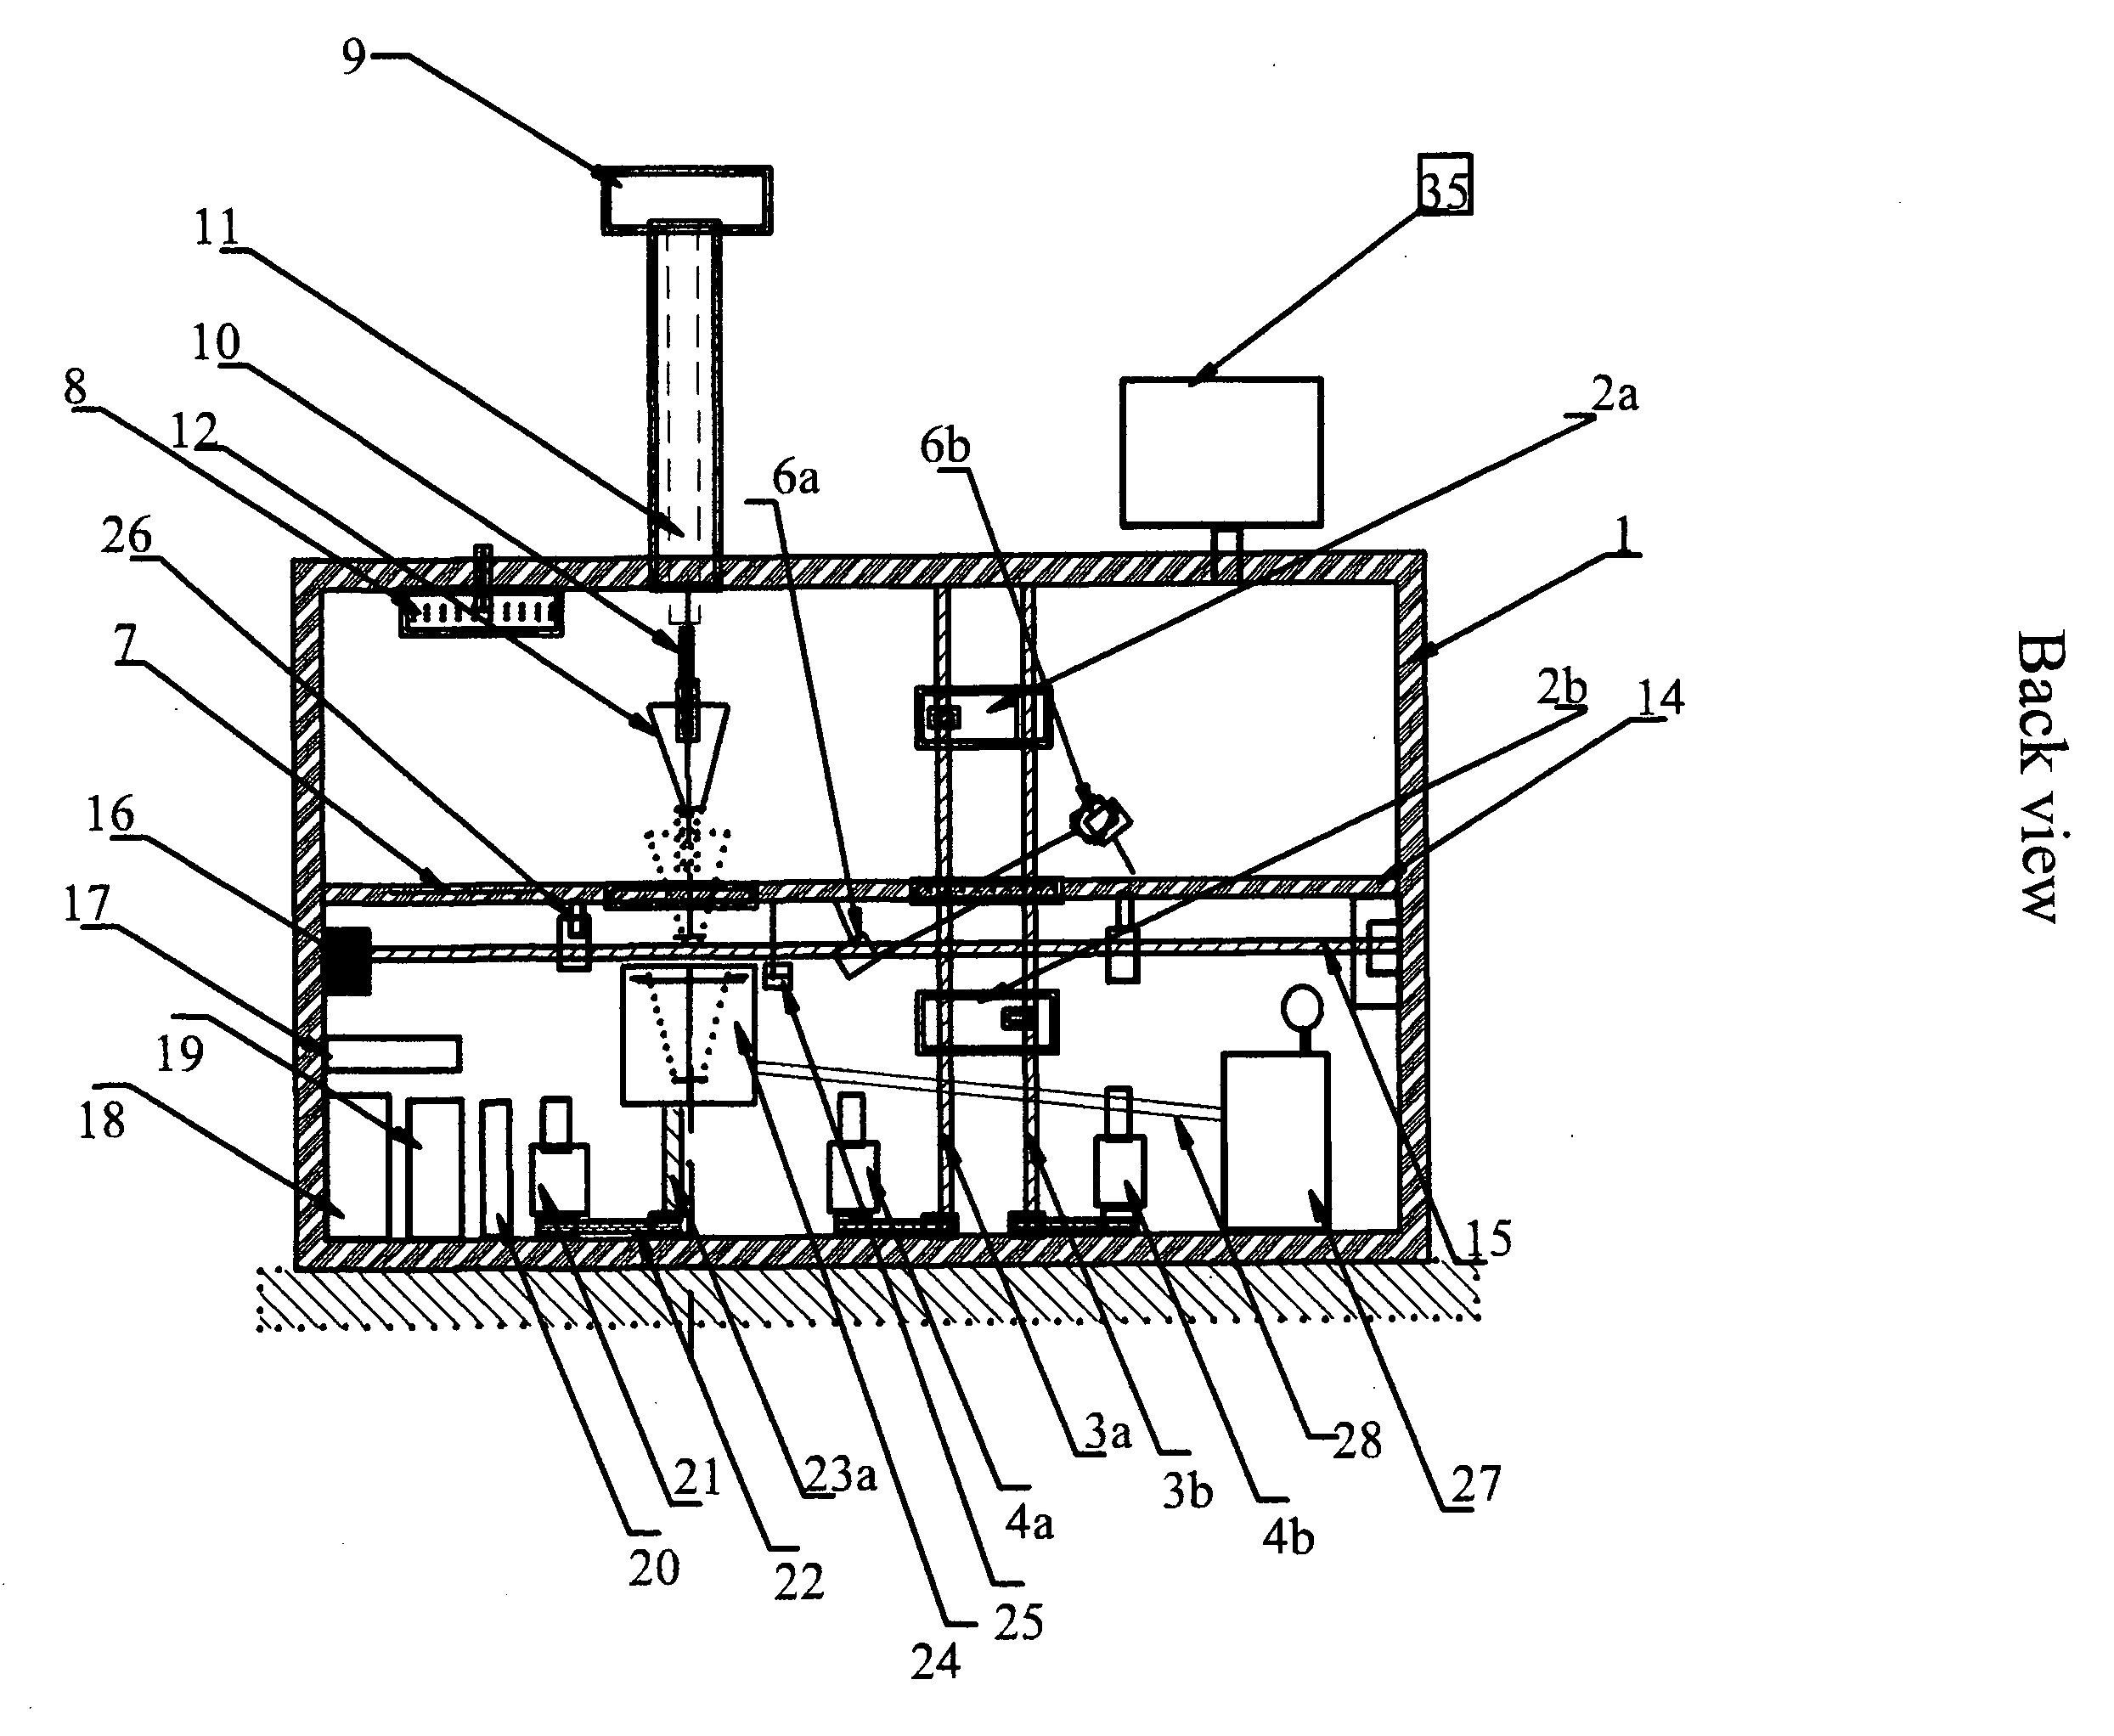 Apparatus to determine ability of plastic material to be shaped by thermoforming process